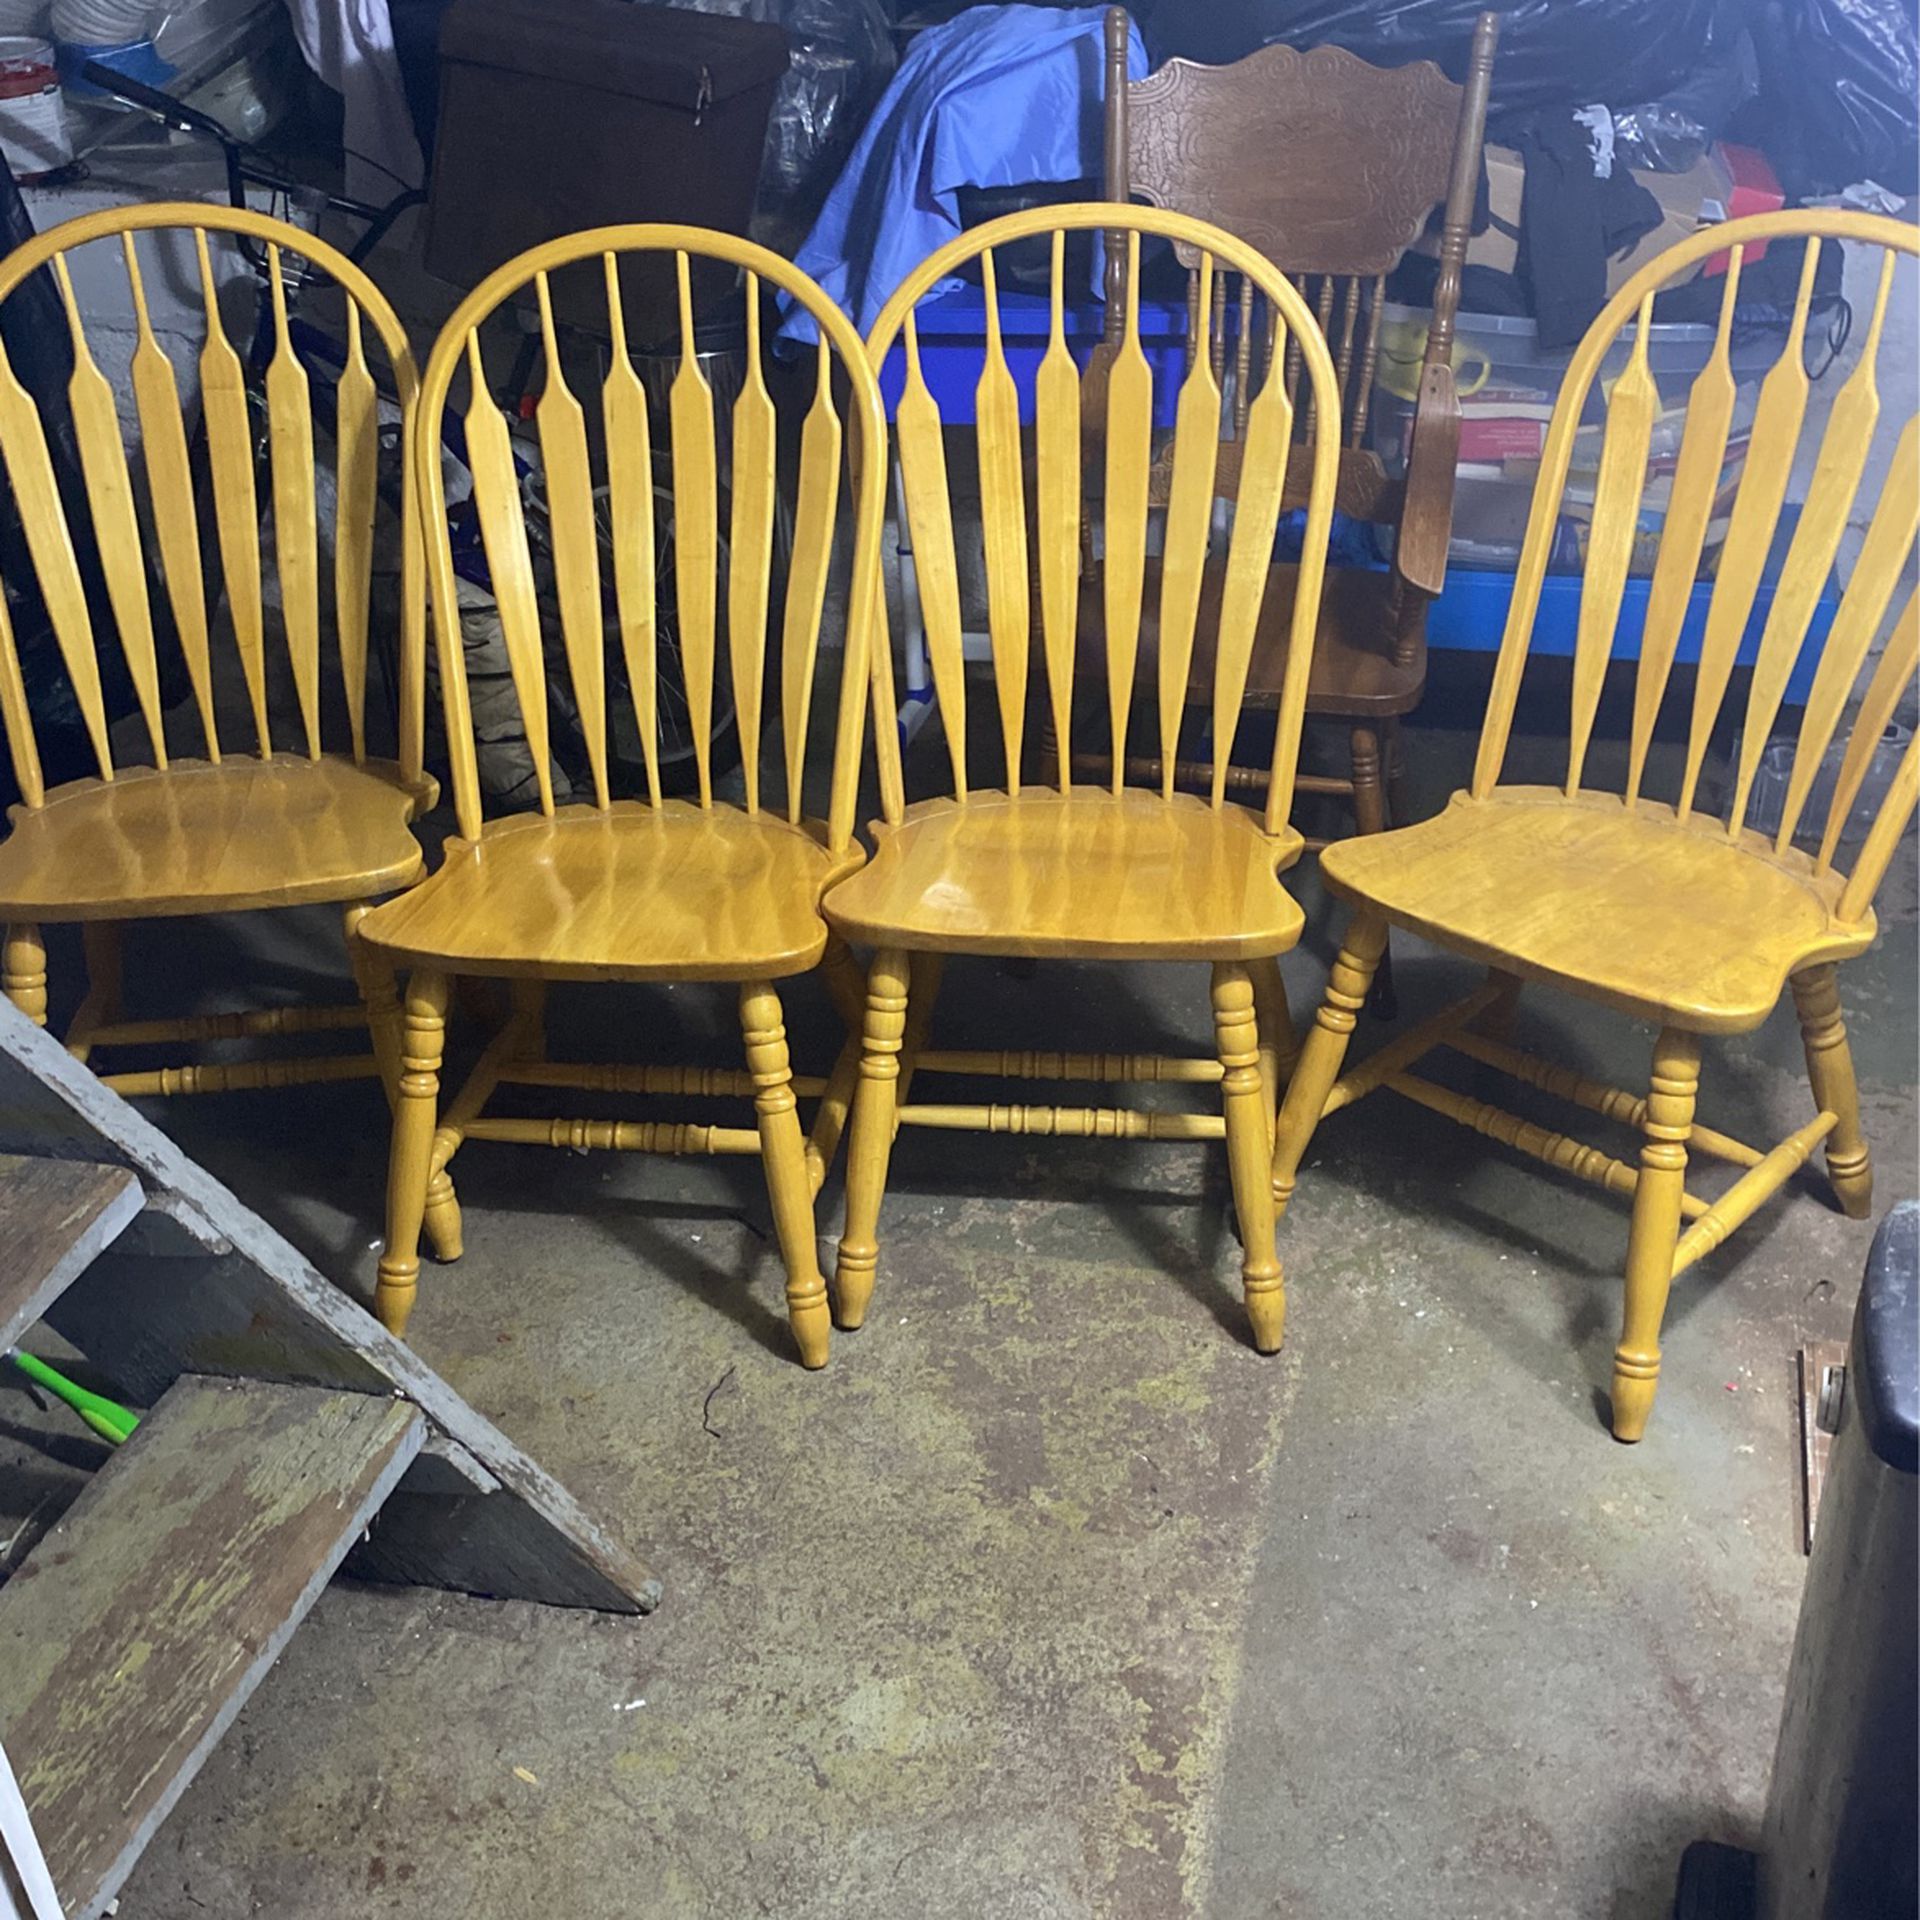 Antique wooden chairs